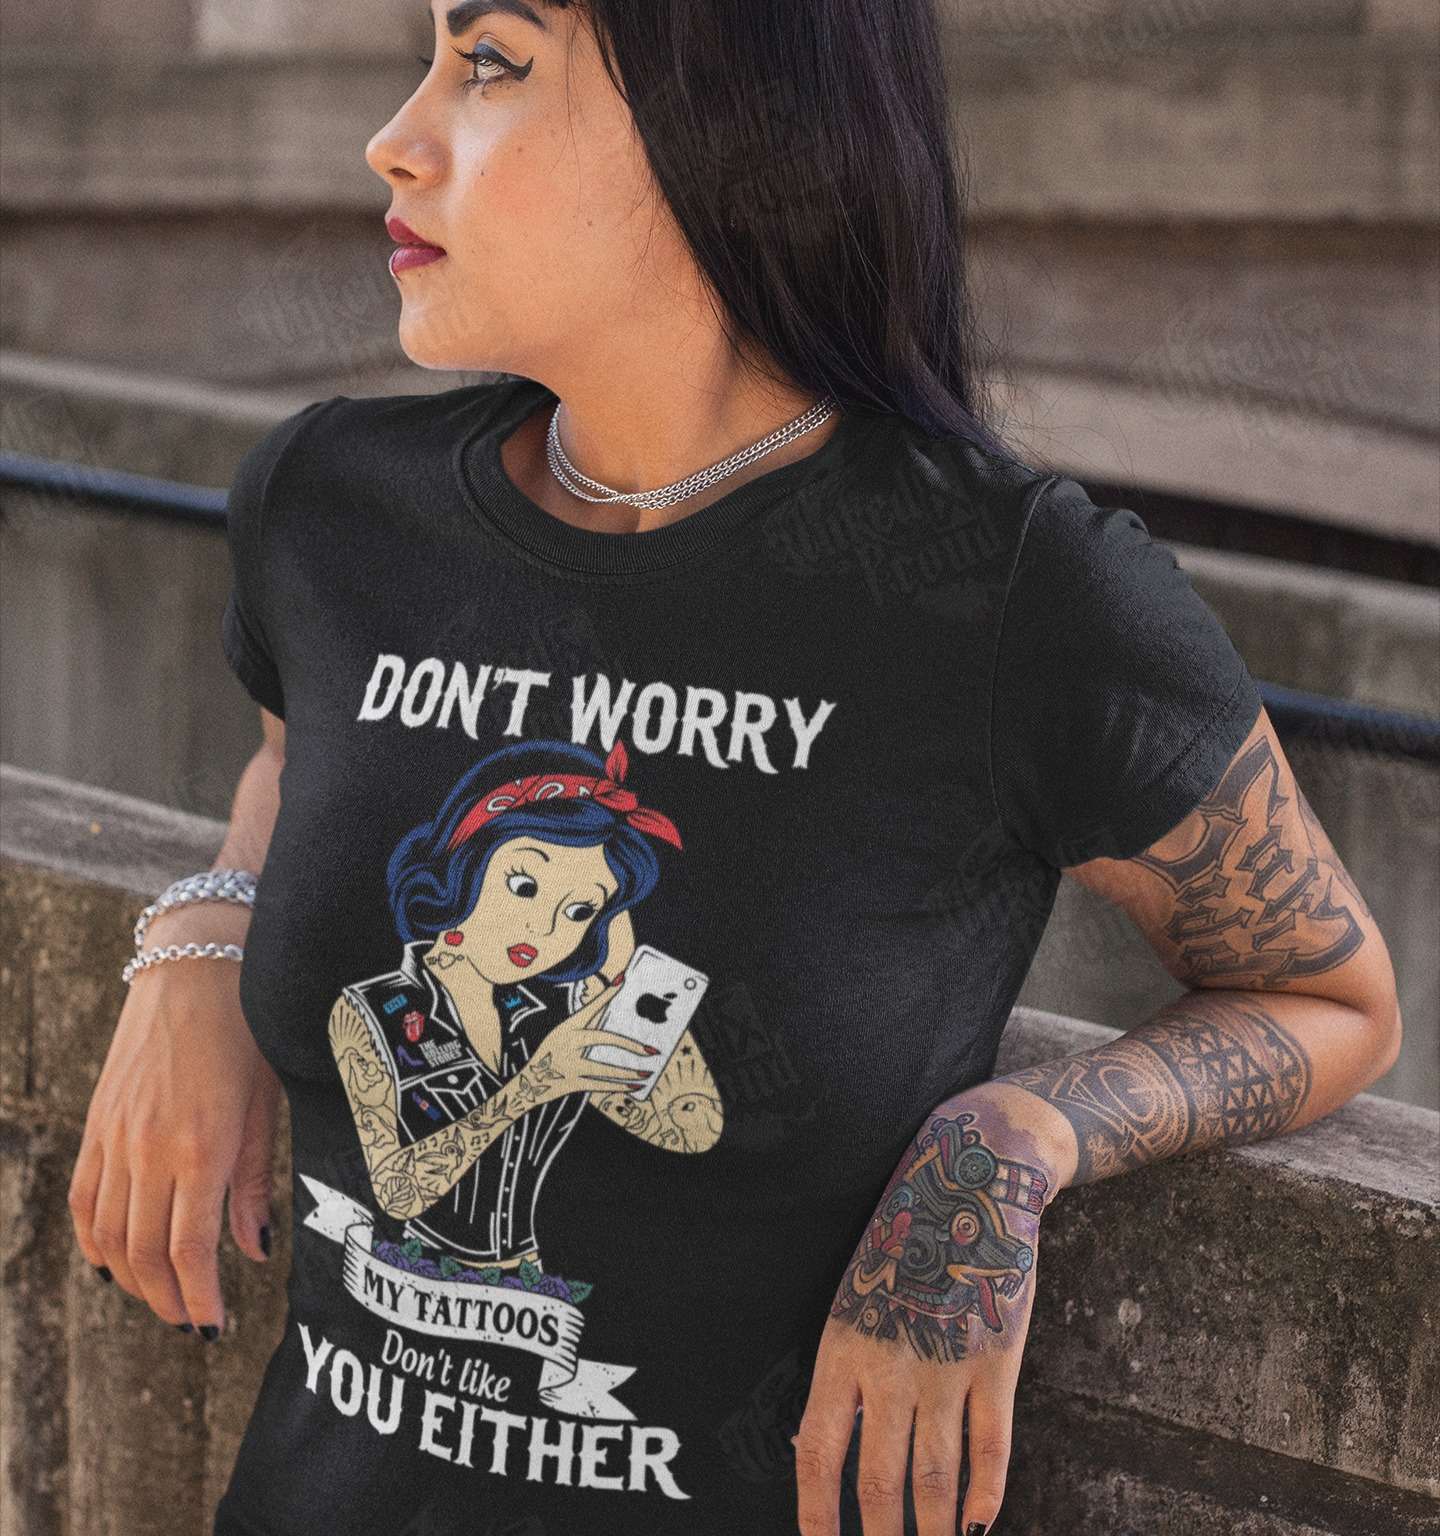 Don't worry my tattoos don't like you either - Girl with tattoos, love having tattoo